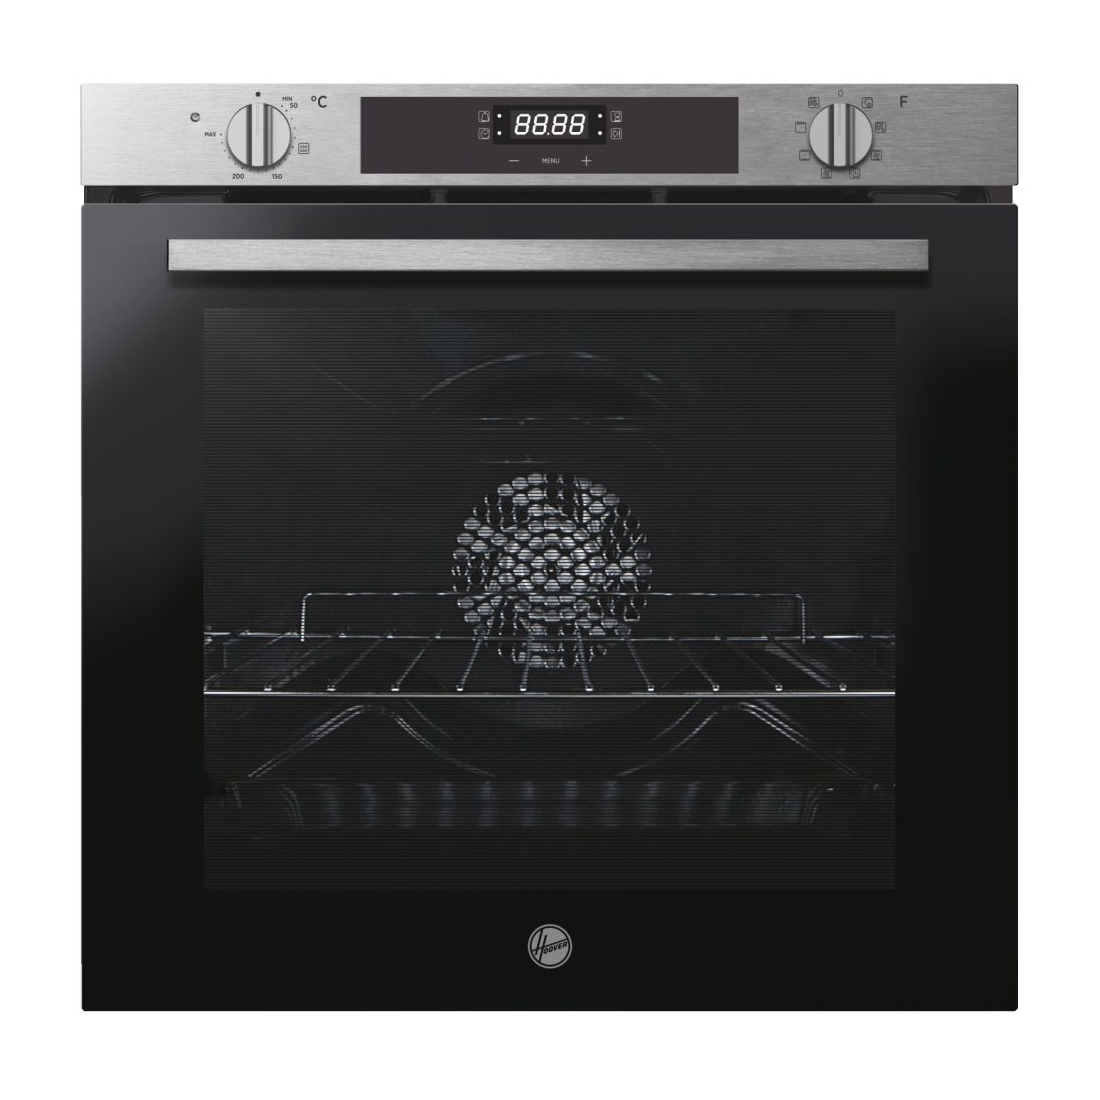 Hoover Built-in Single Electric Oven Class A Stainless Steel